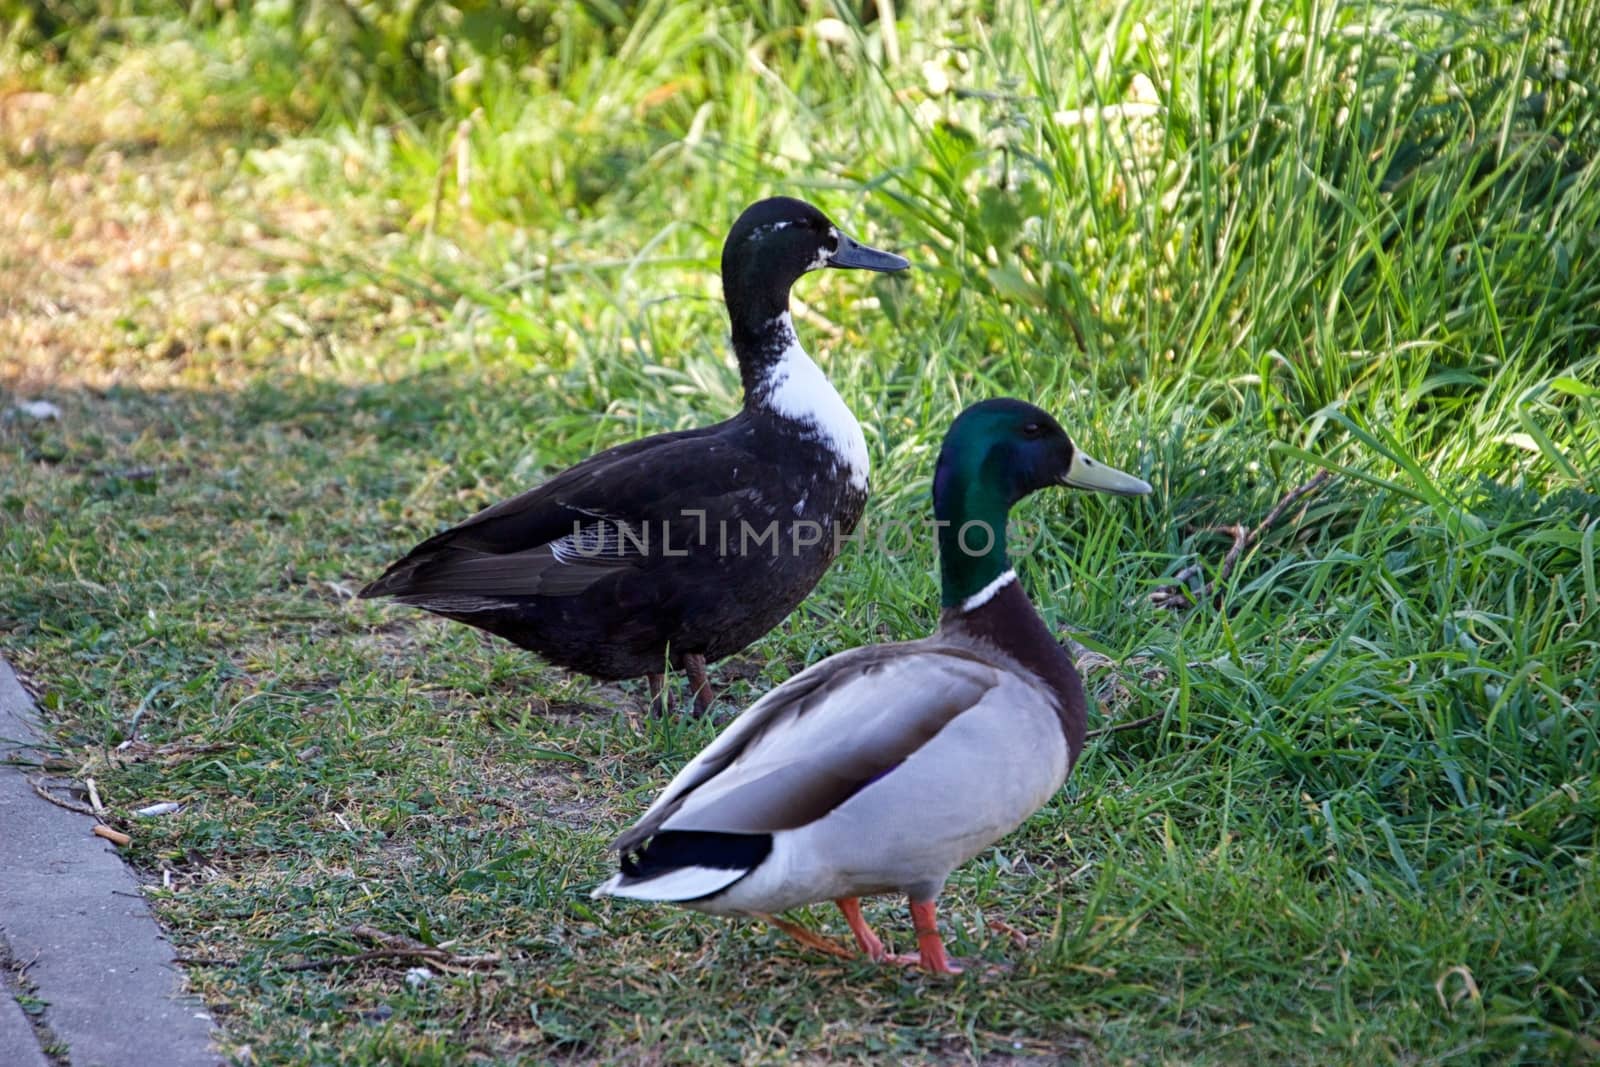 Two ducks on the grass